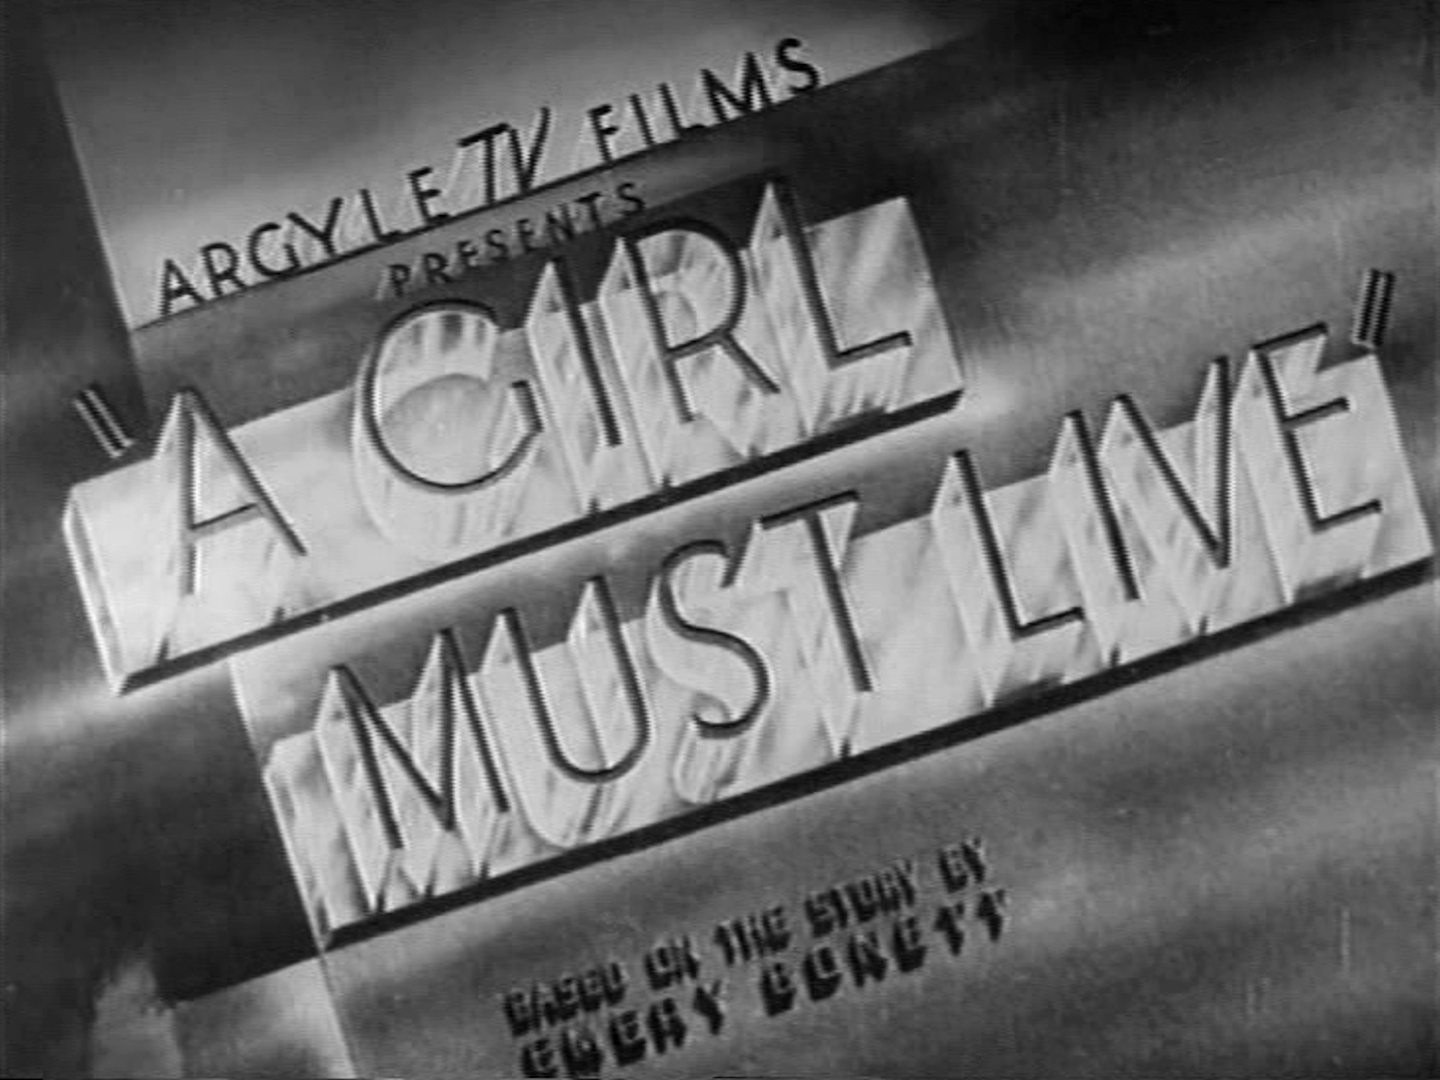 Main title from A Girl Must Live (1939) (1). Argyle TV Films presents